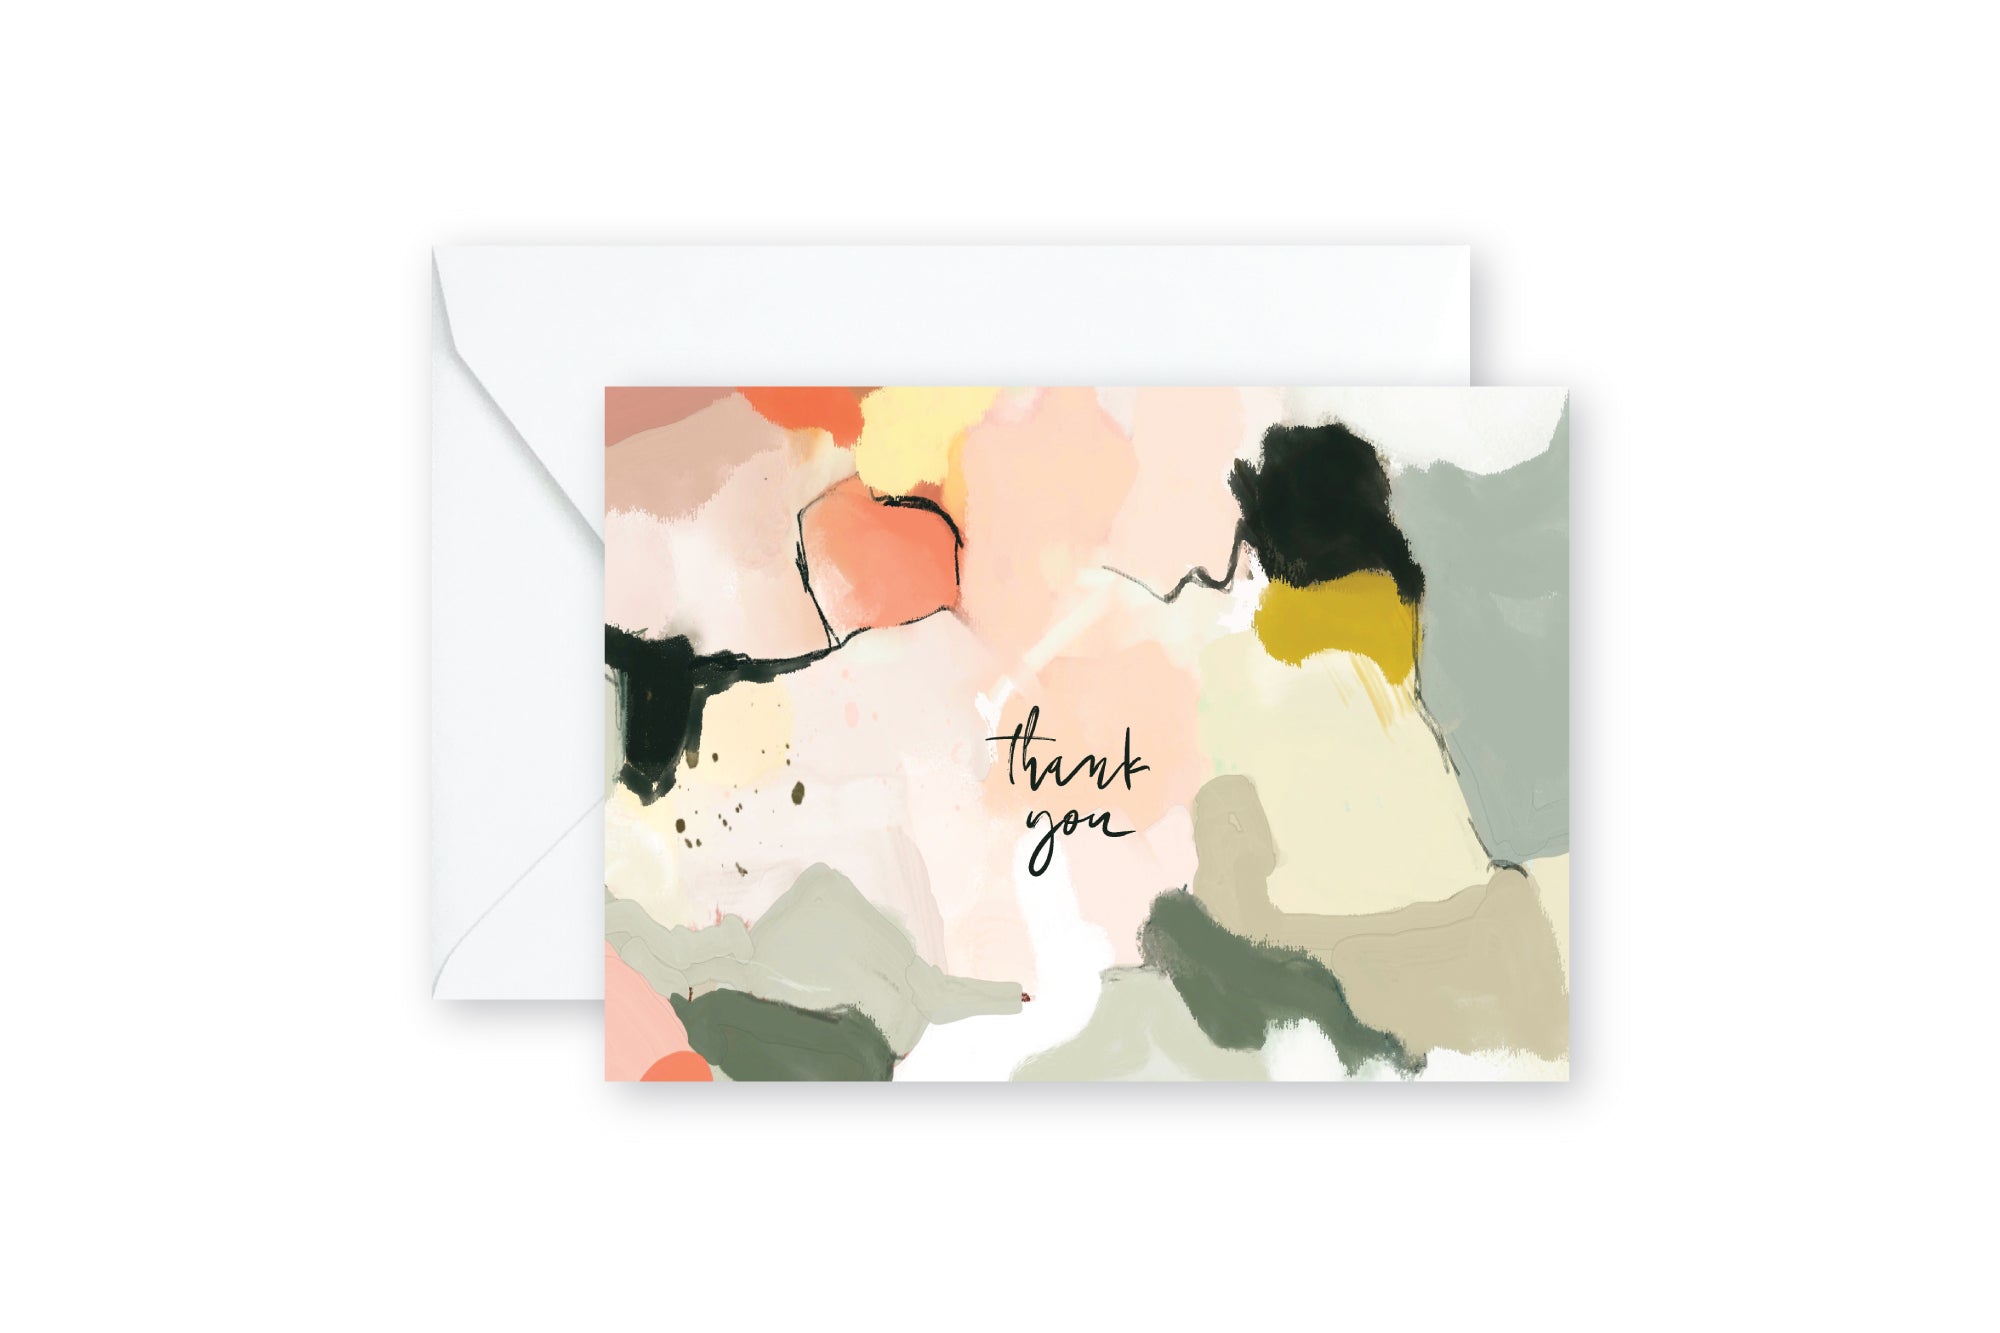 THANK YOU notecard with abstract design in shades of coral, blush pnk, sage green over white envelope